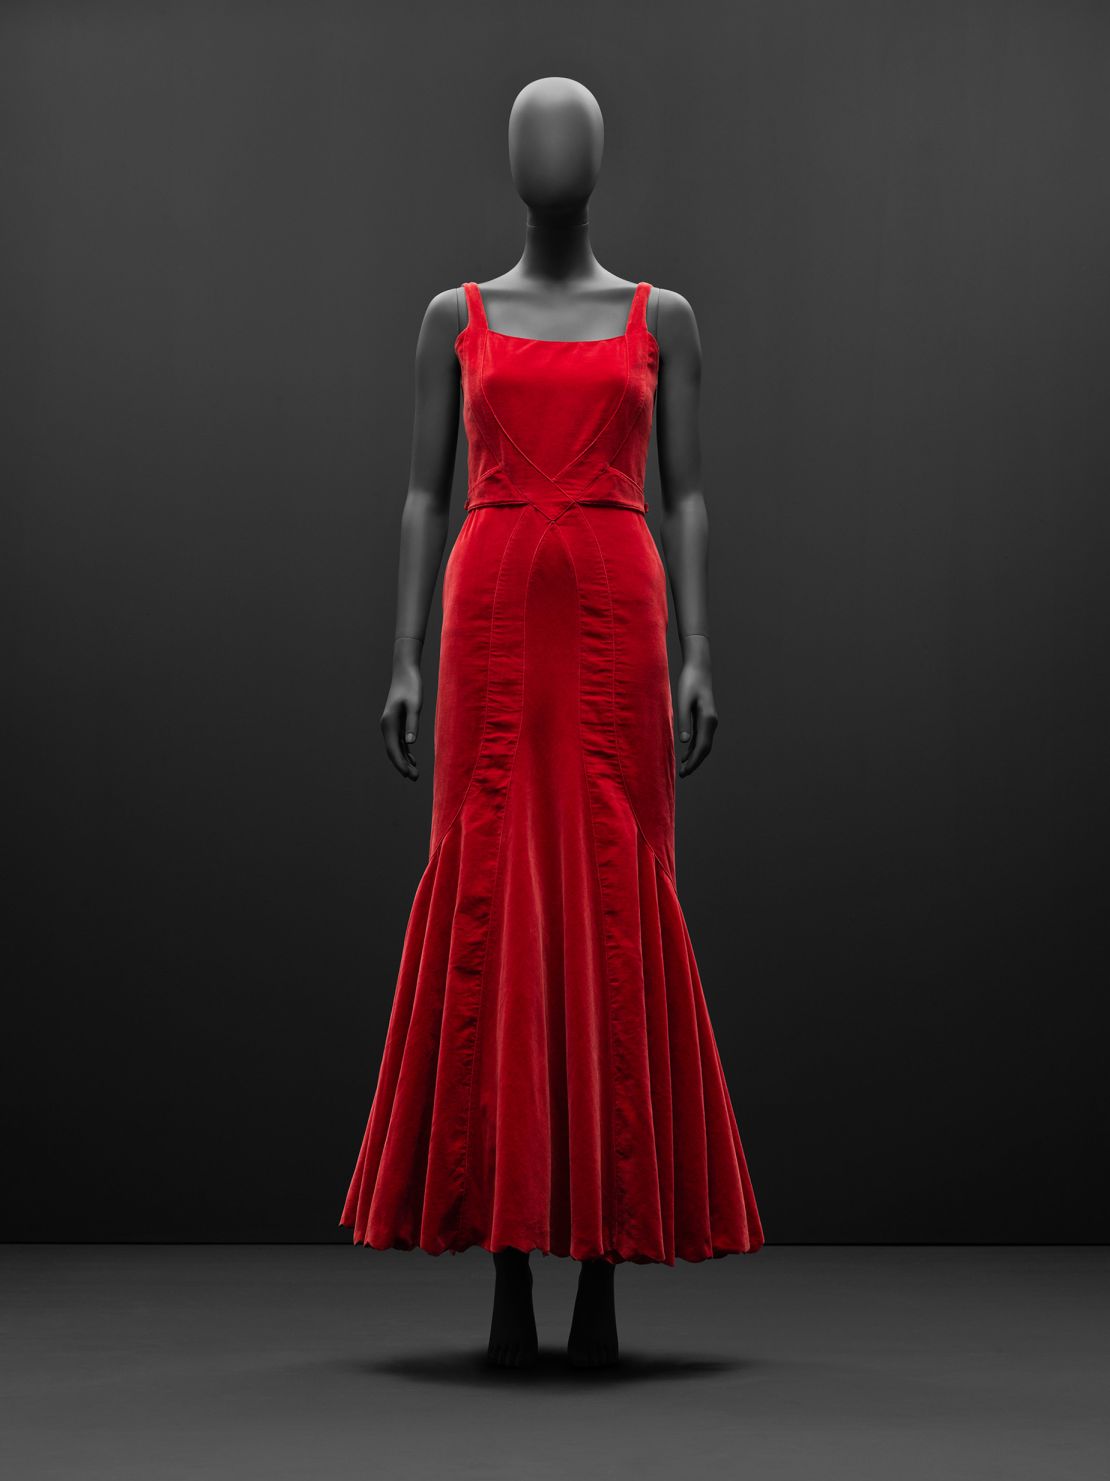 While Chanel made the little black dress famous, her work was incredibly diverse — like this red piece, dating from 1932.